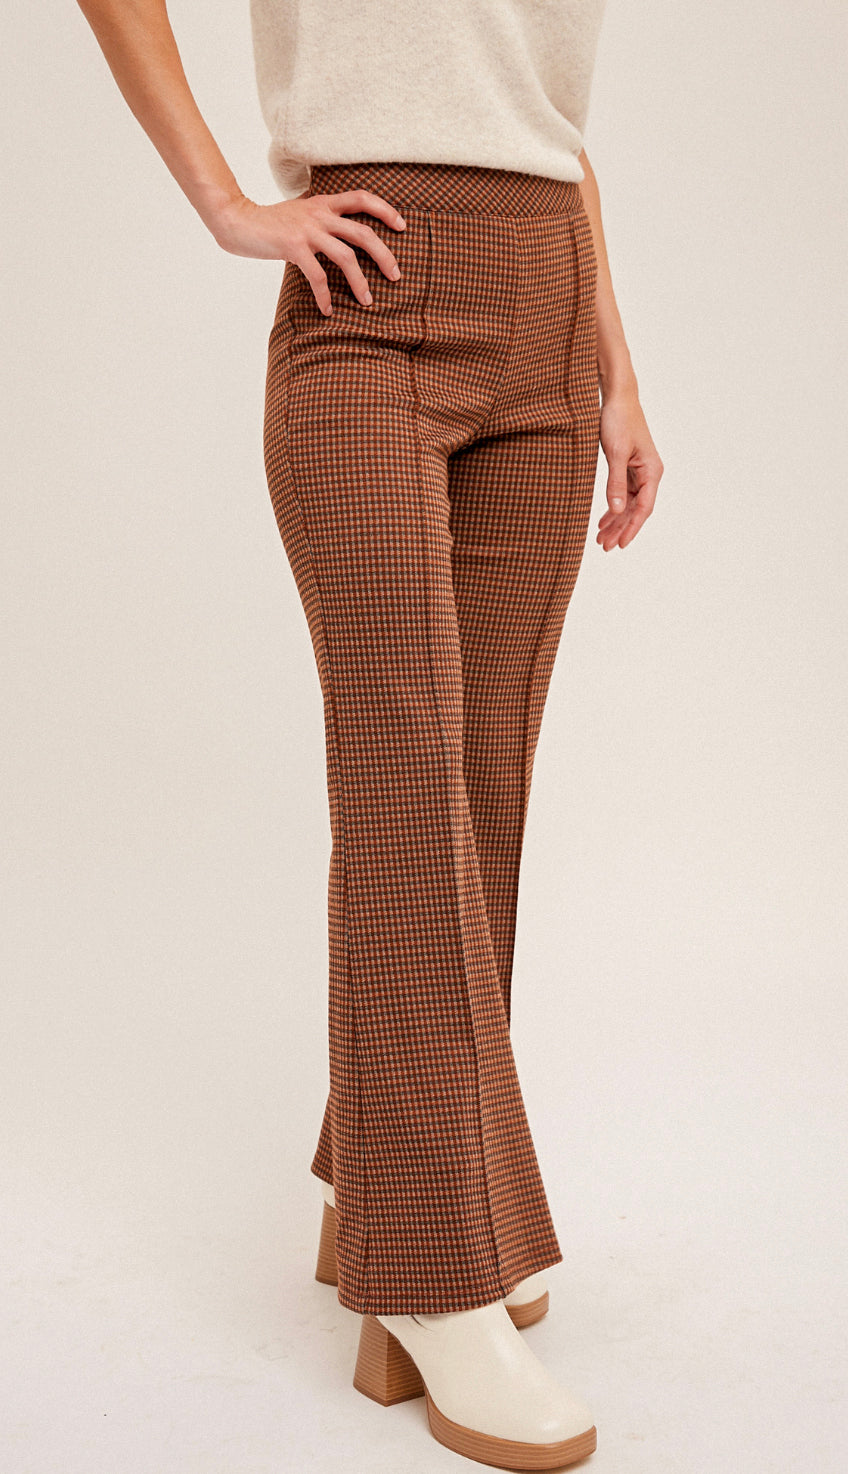 Bring It Back Check Flare Pants- Rust/Brown